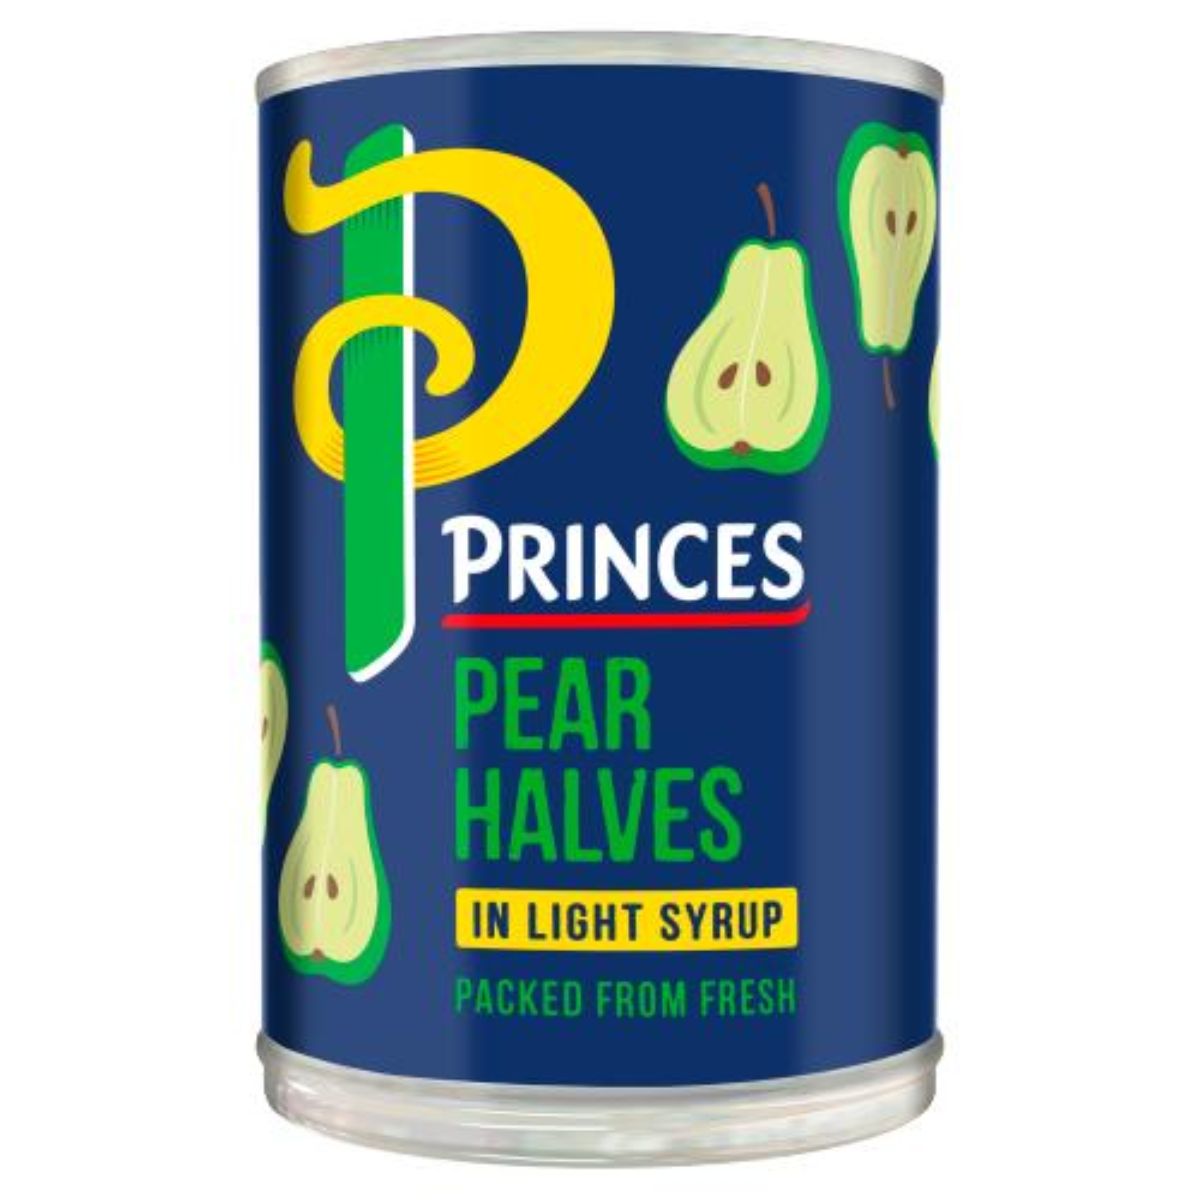 Princes - Pear Halves in Light Syrup - 410g.